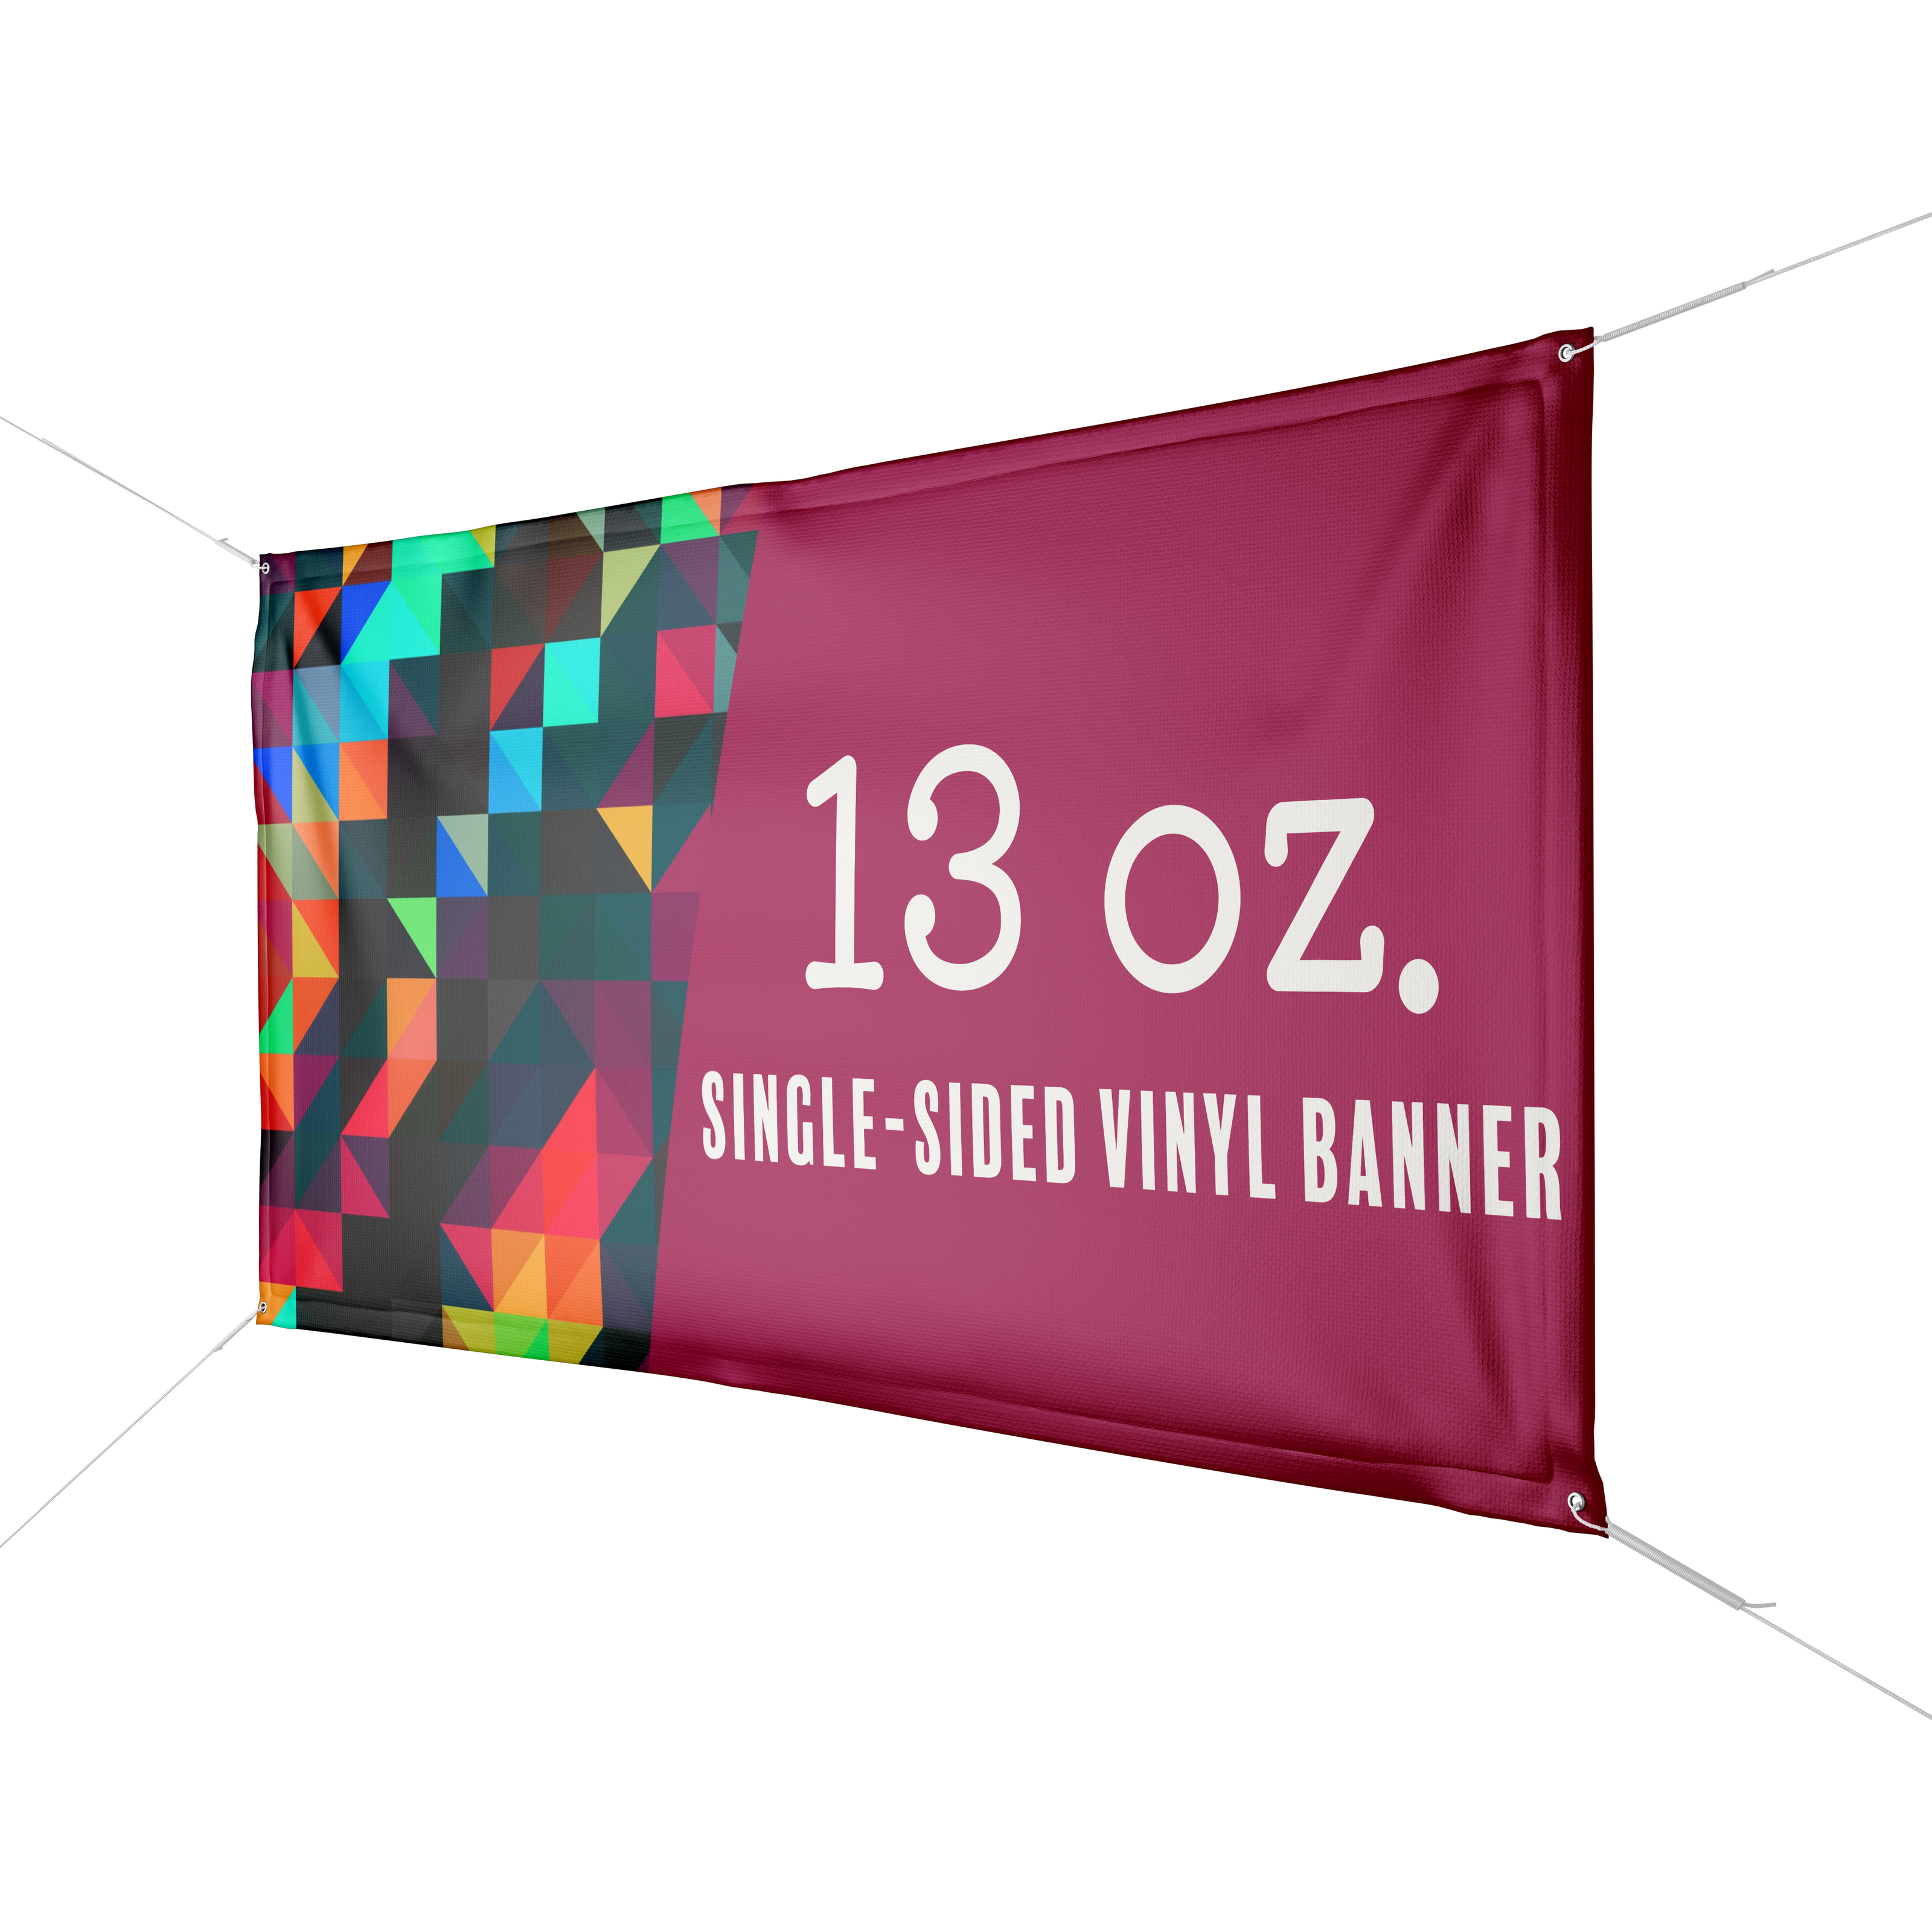 A colorful banner is displayed to show an example of a 13 oz vinyl banner.